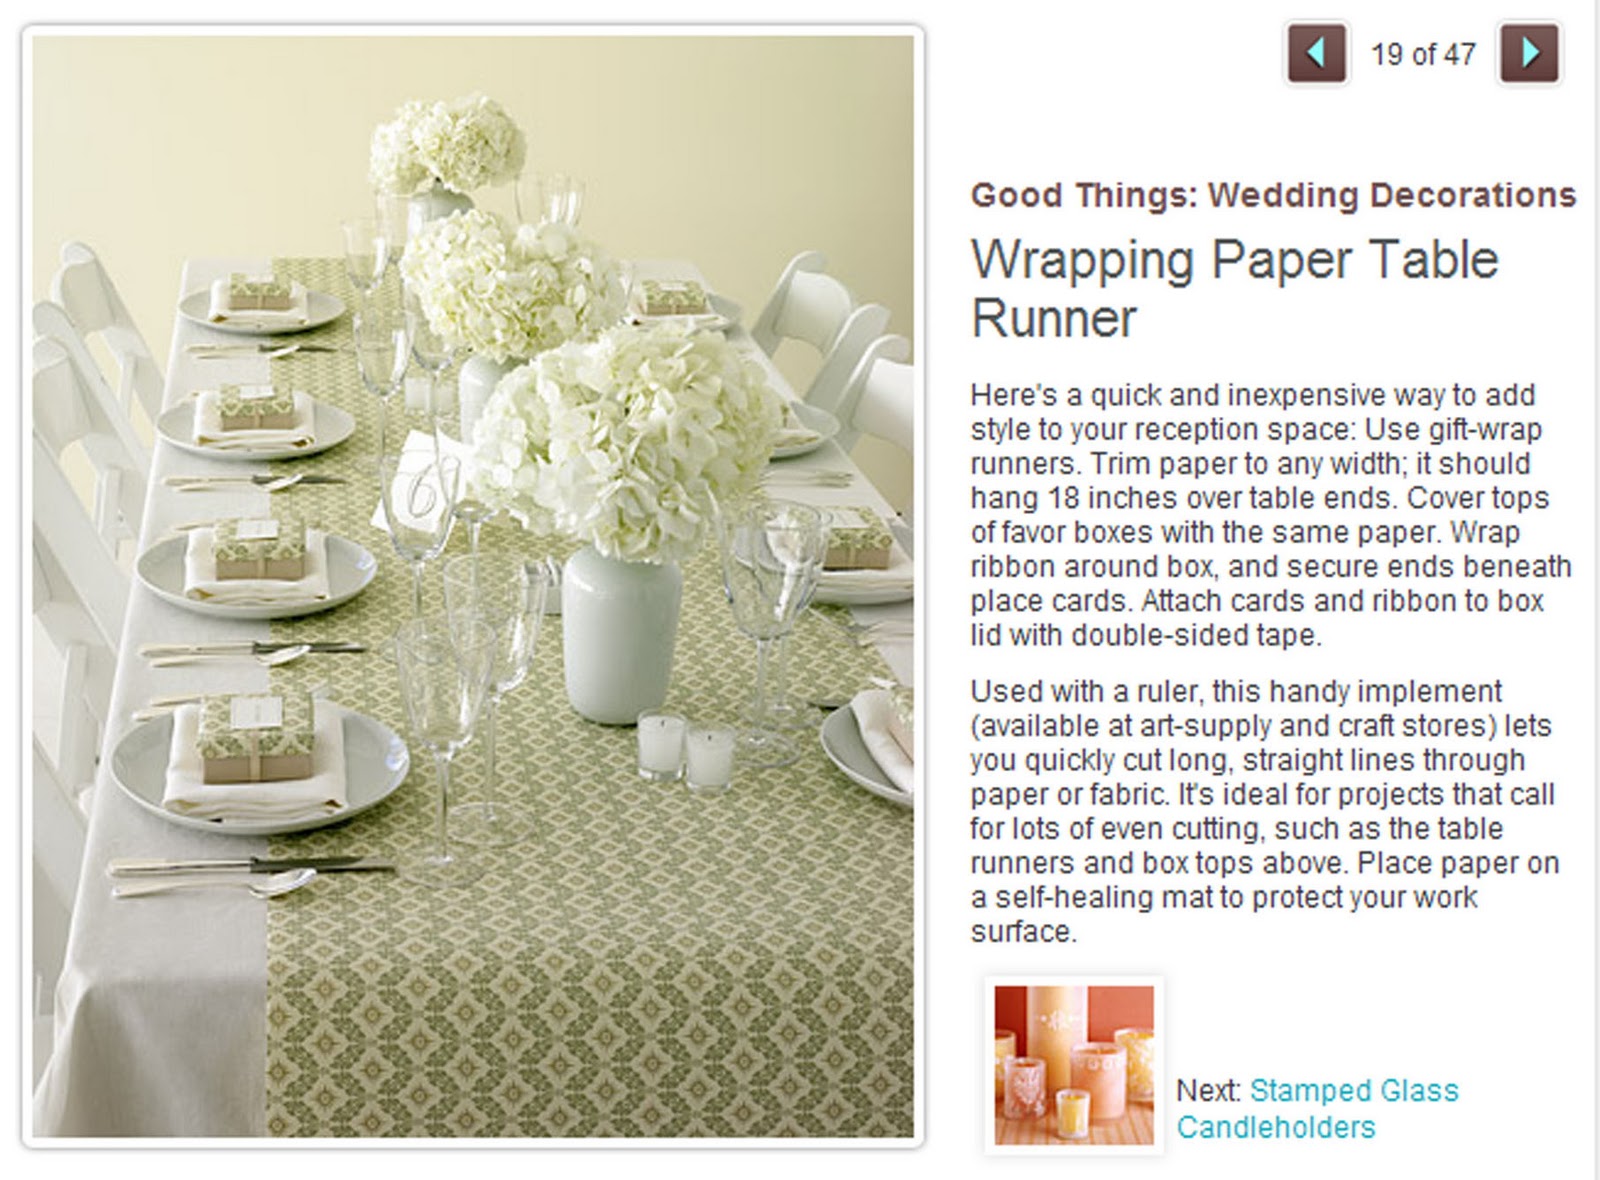 Wrapping paper table runner